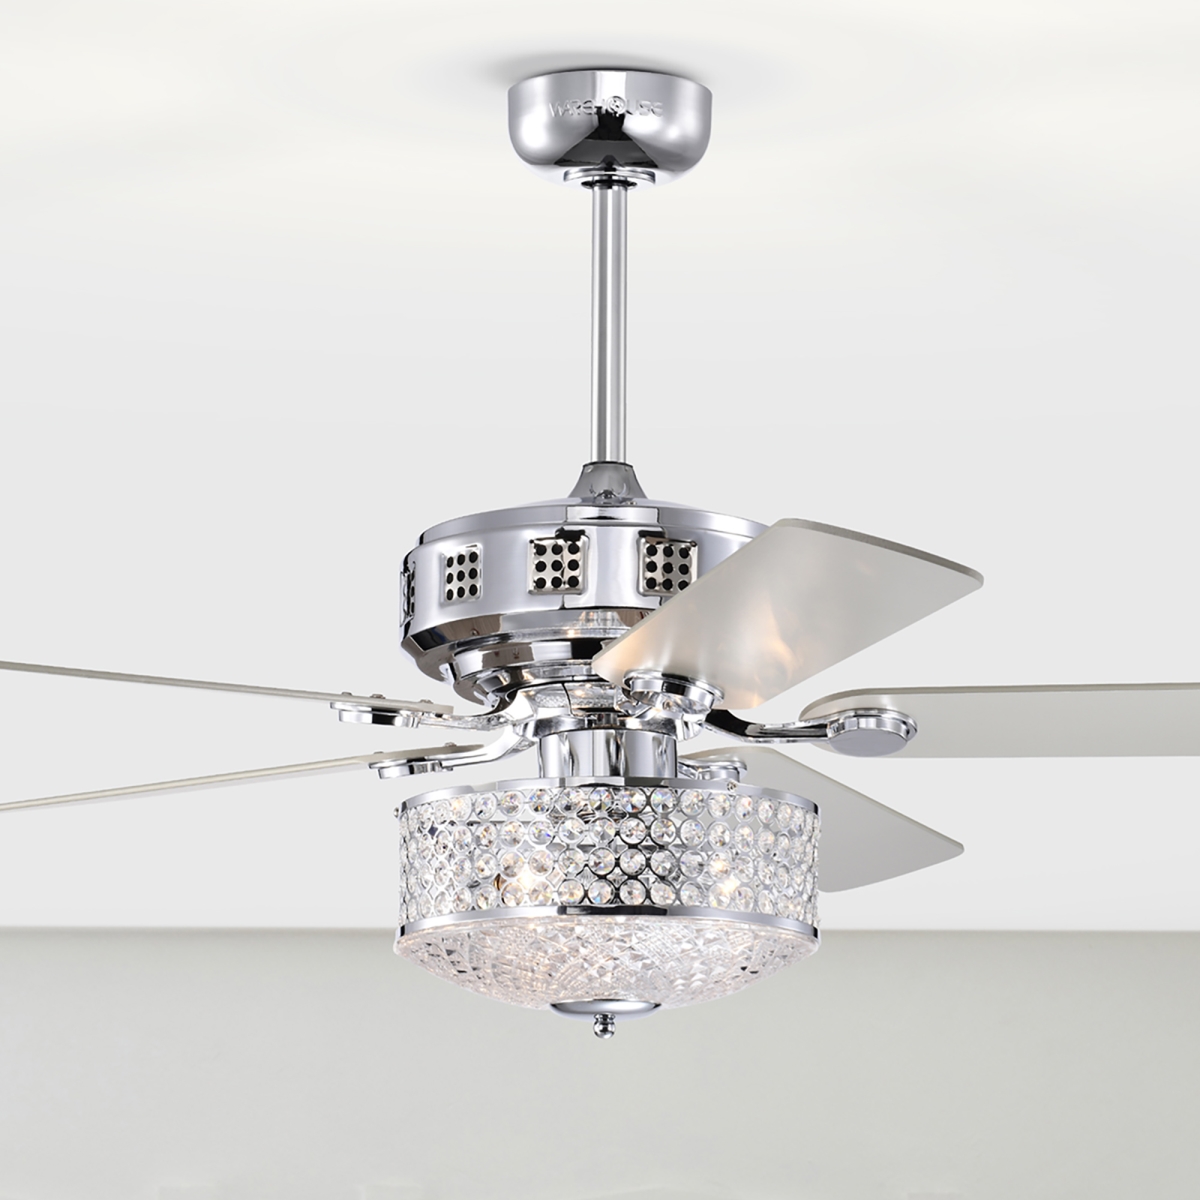 Picture of Warehouse of Tiffany AY16Y16CR 52 in. Callen 3-Light Indoor Chrome Ceiling Fan with Light Kit